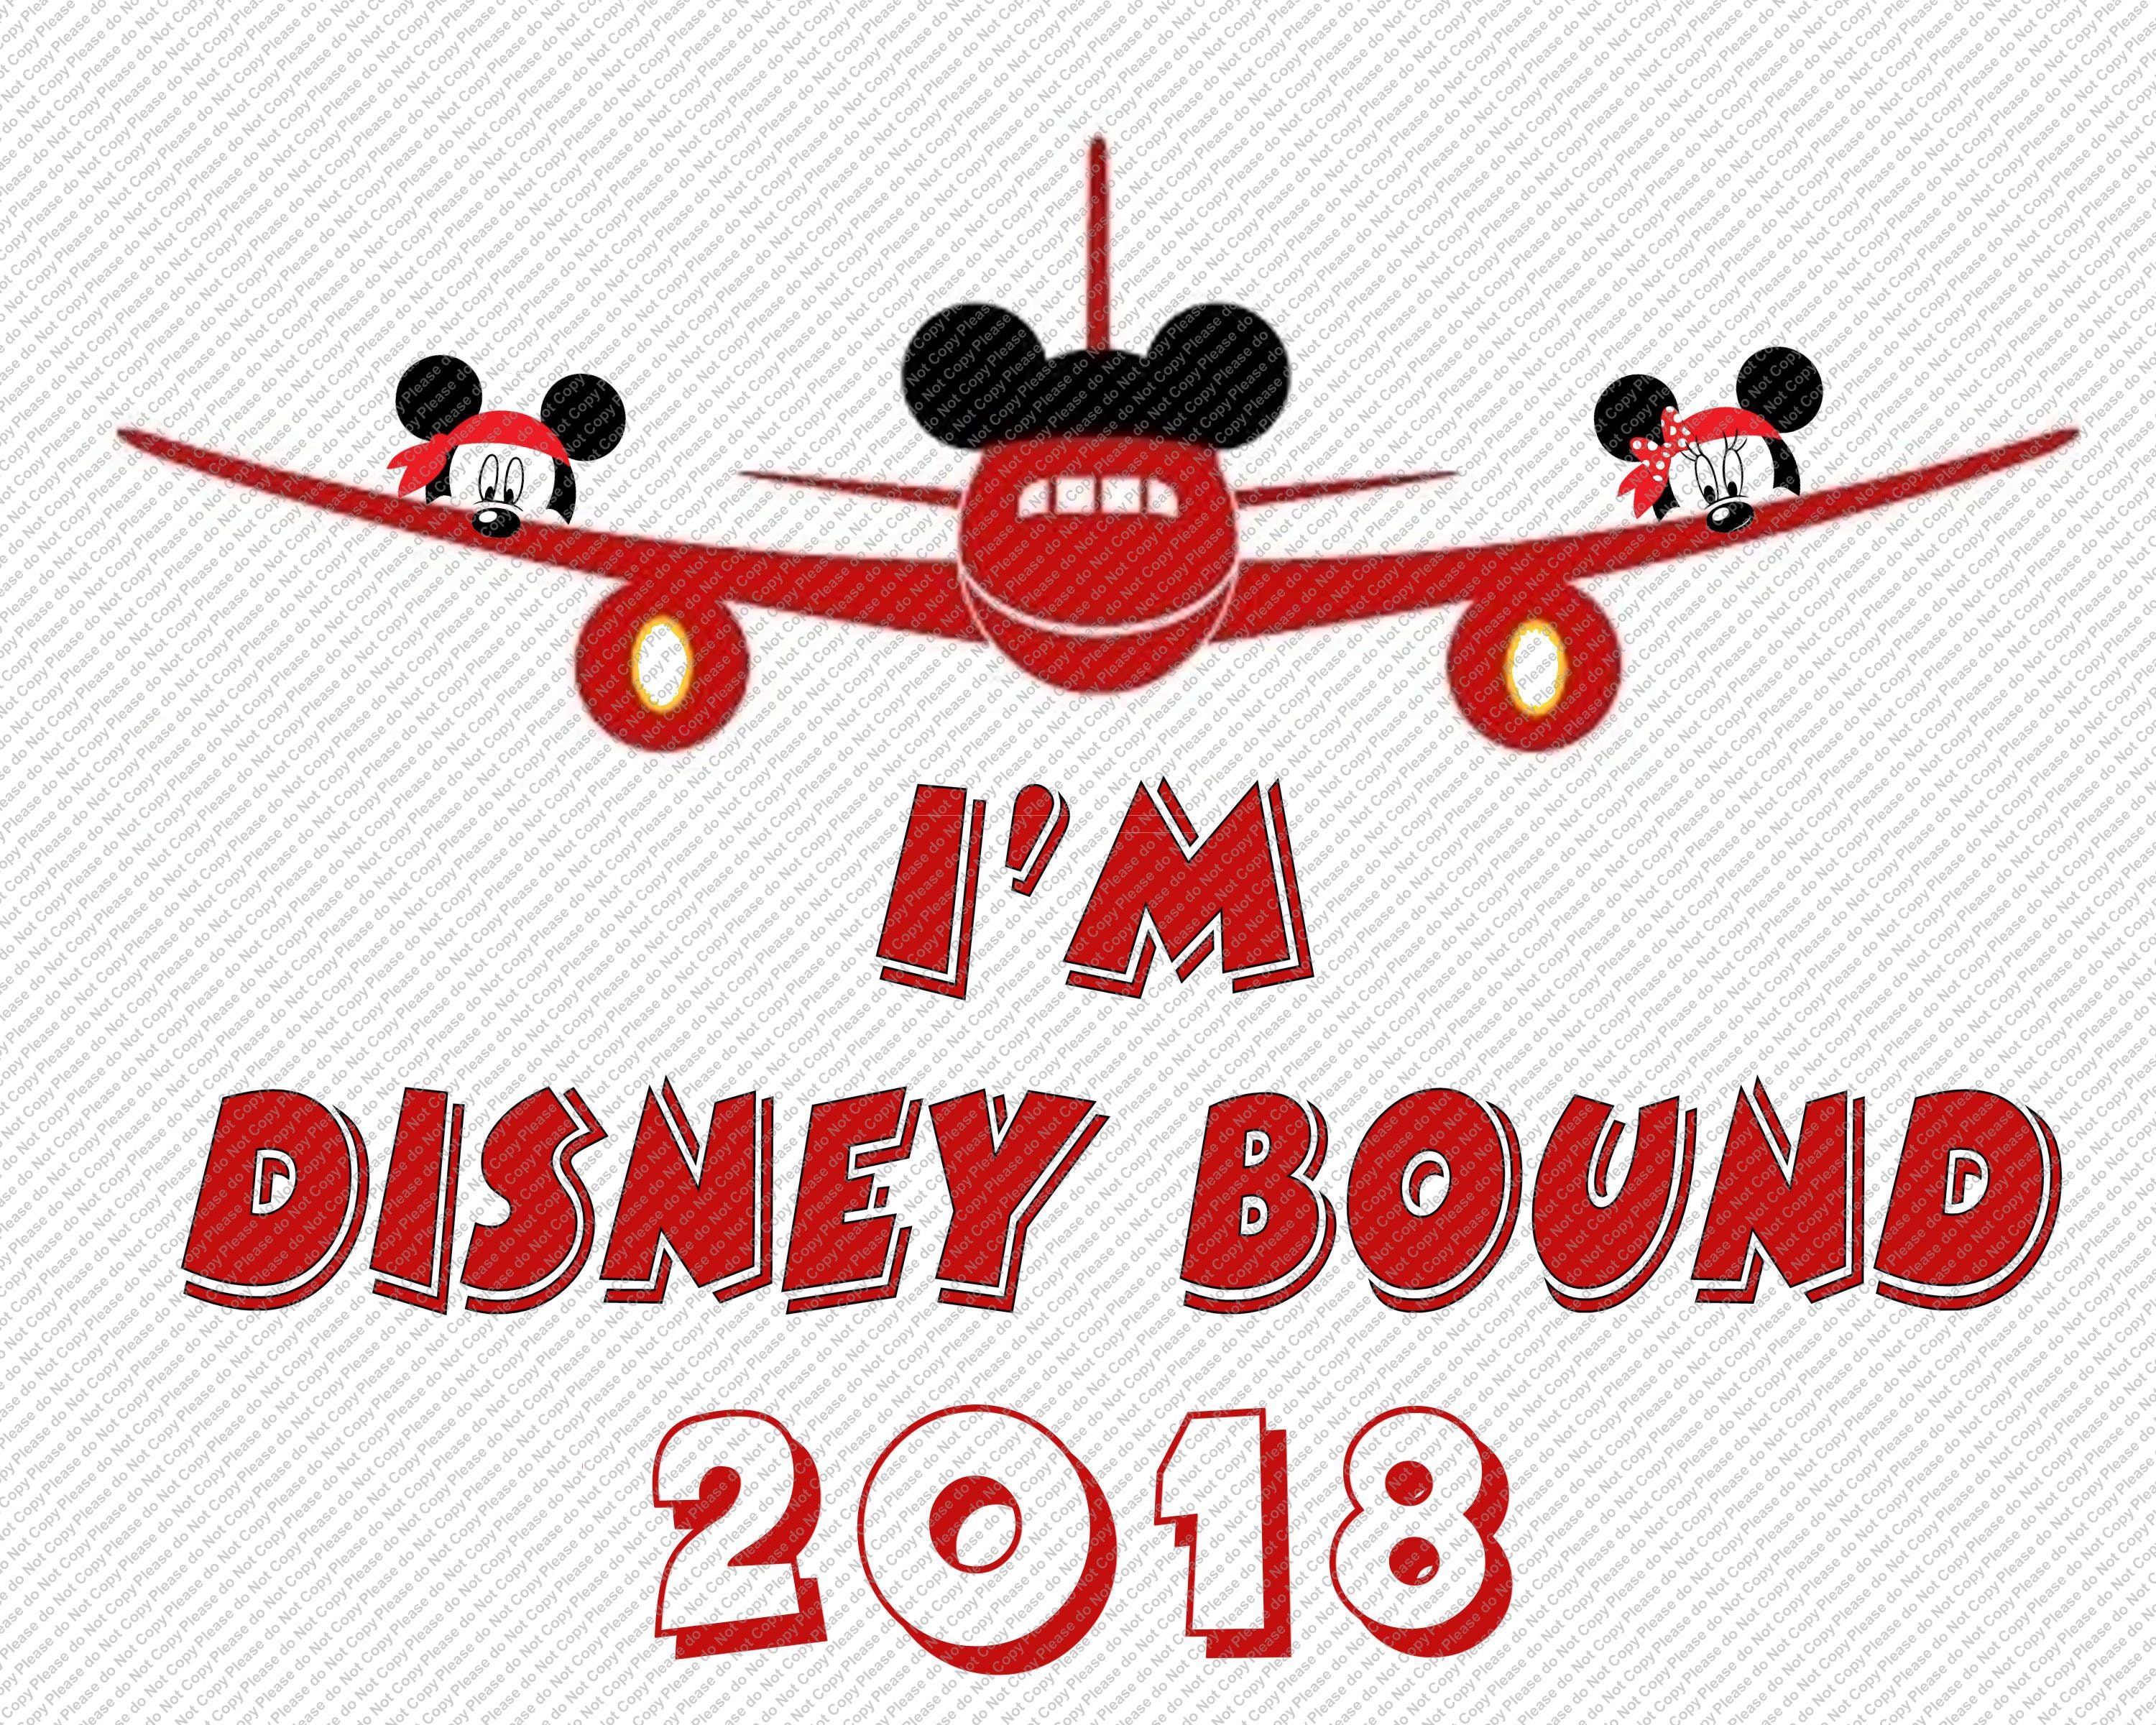 Download I'm Disney Bound 2018 Airplane Minnie and Mickey Mouse ...